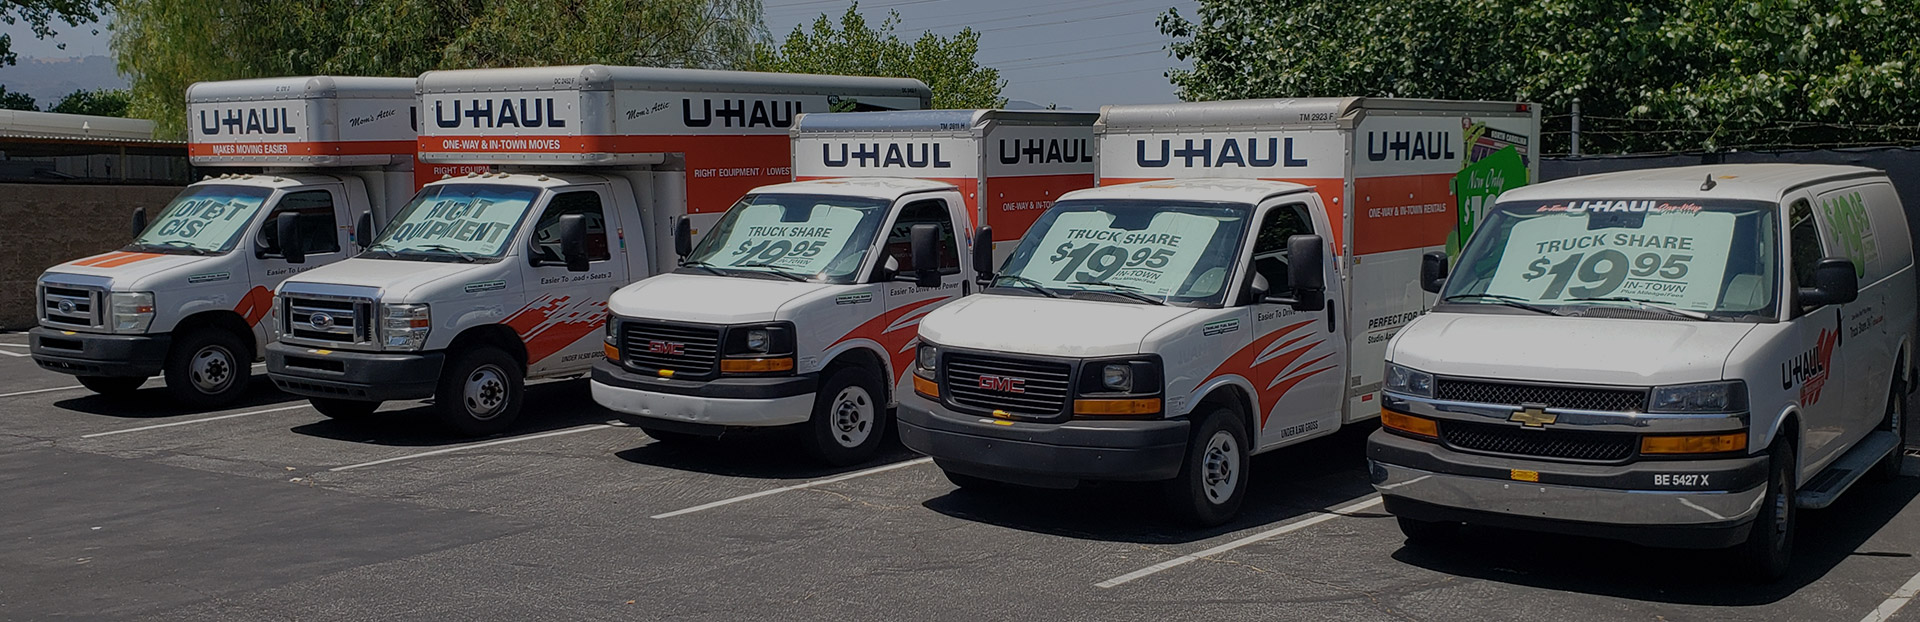 uhaul trucks and trailers for rental in southern ca